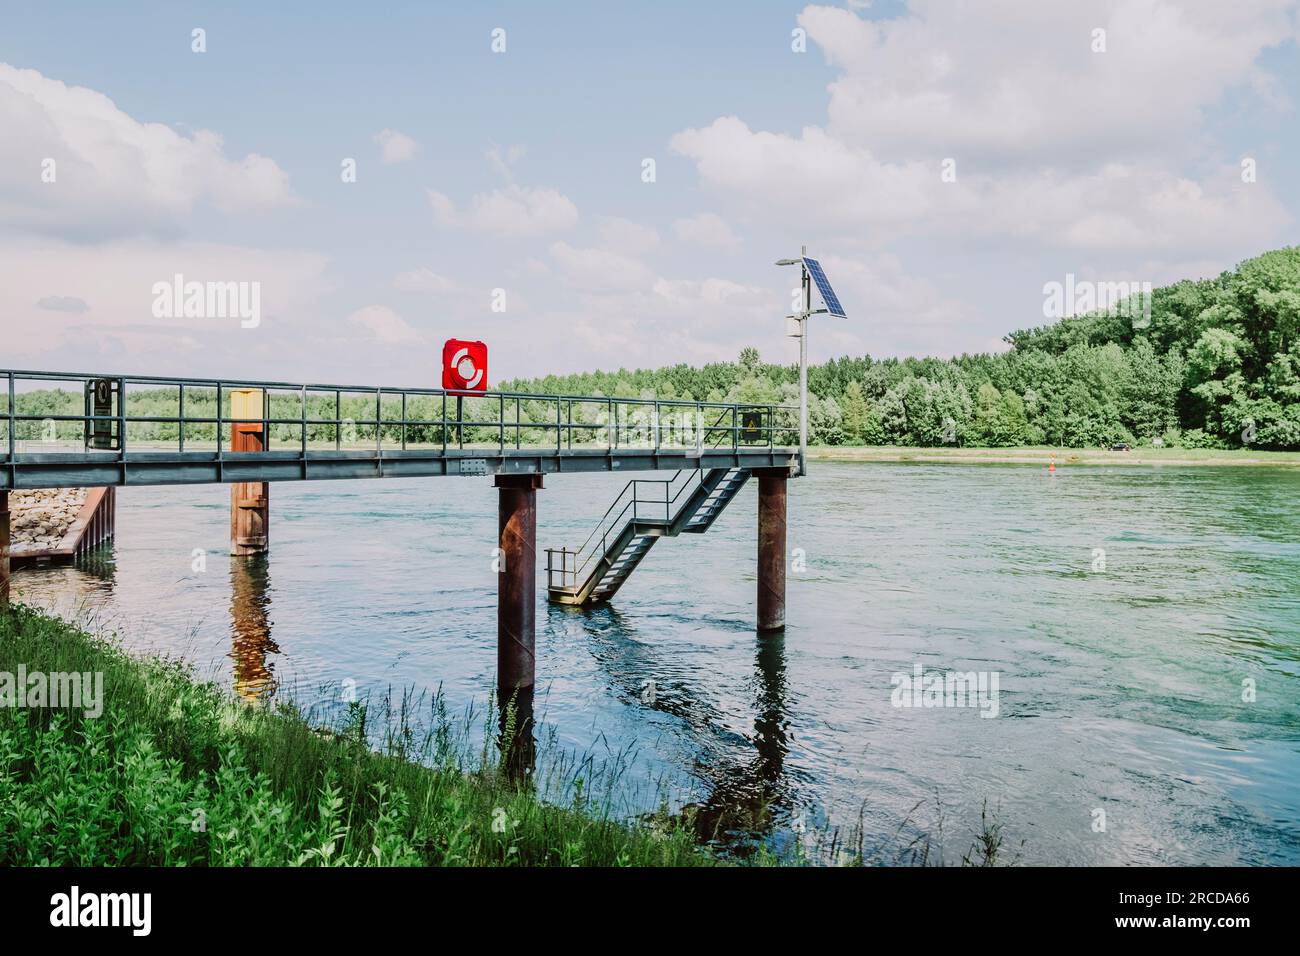 Landscape in the Rin river, Germany Stock Photo